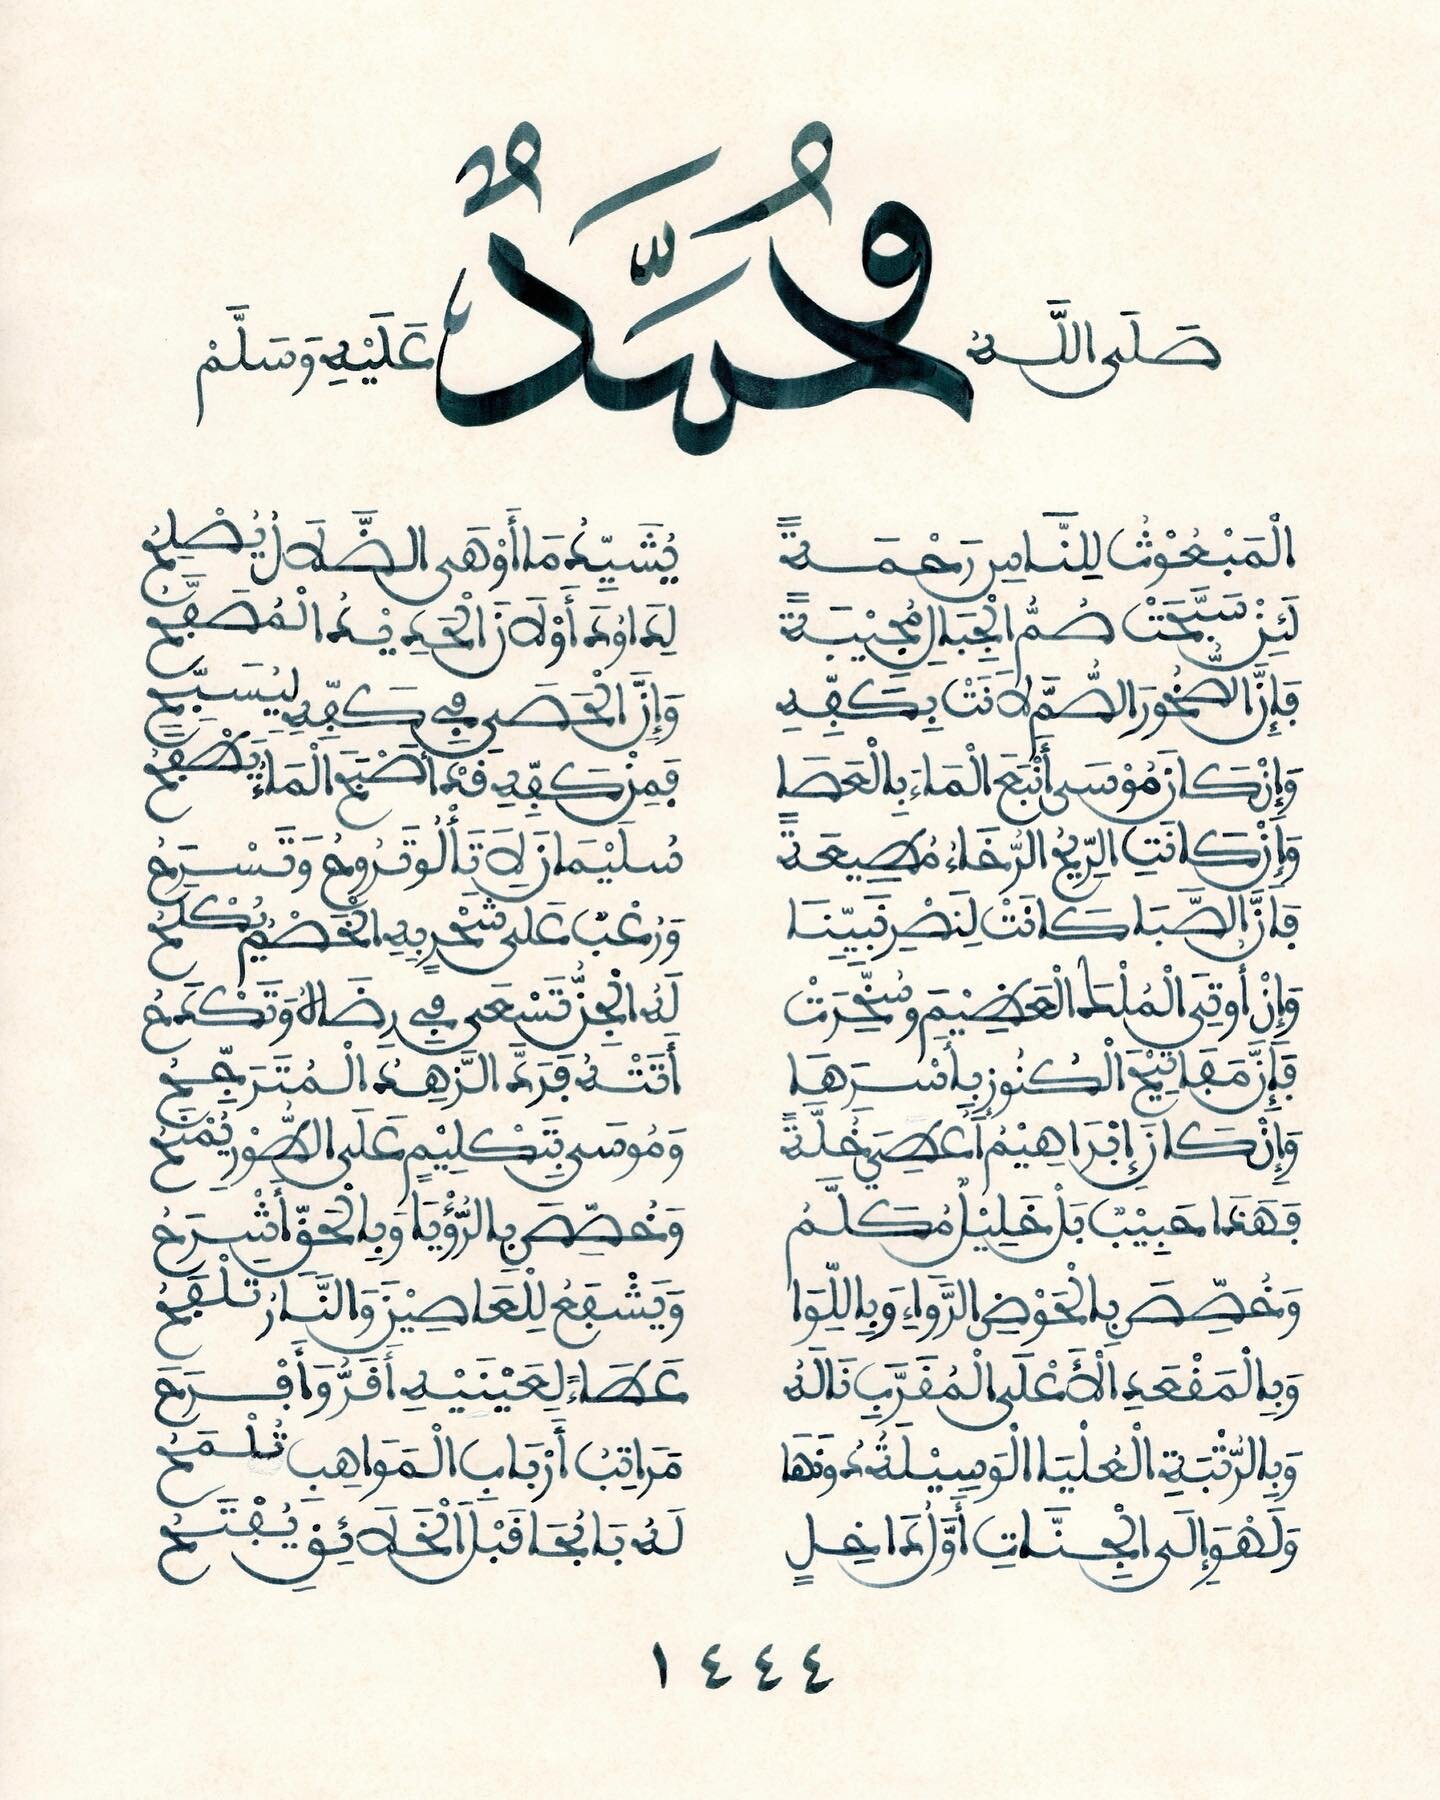 Salam RabiulAwwal 💚 The month of Mawlid is here ✨

Here is a piece written submitted for a competition. A poem on our Prophet ﷺ
Script: Maghribi Mabsut 

May this blessed month be a means for us to strive to increase our love for our Beloved ﷺ, to r